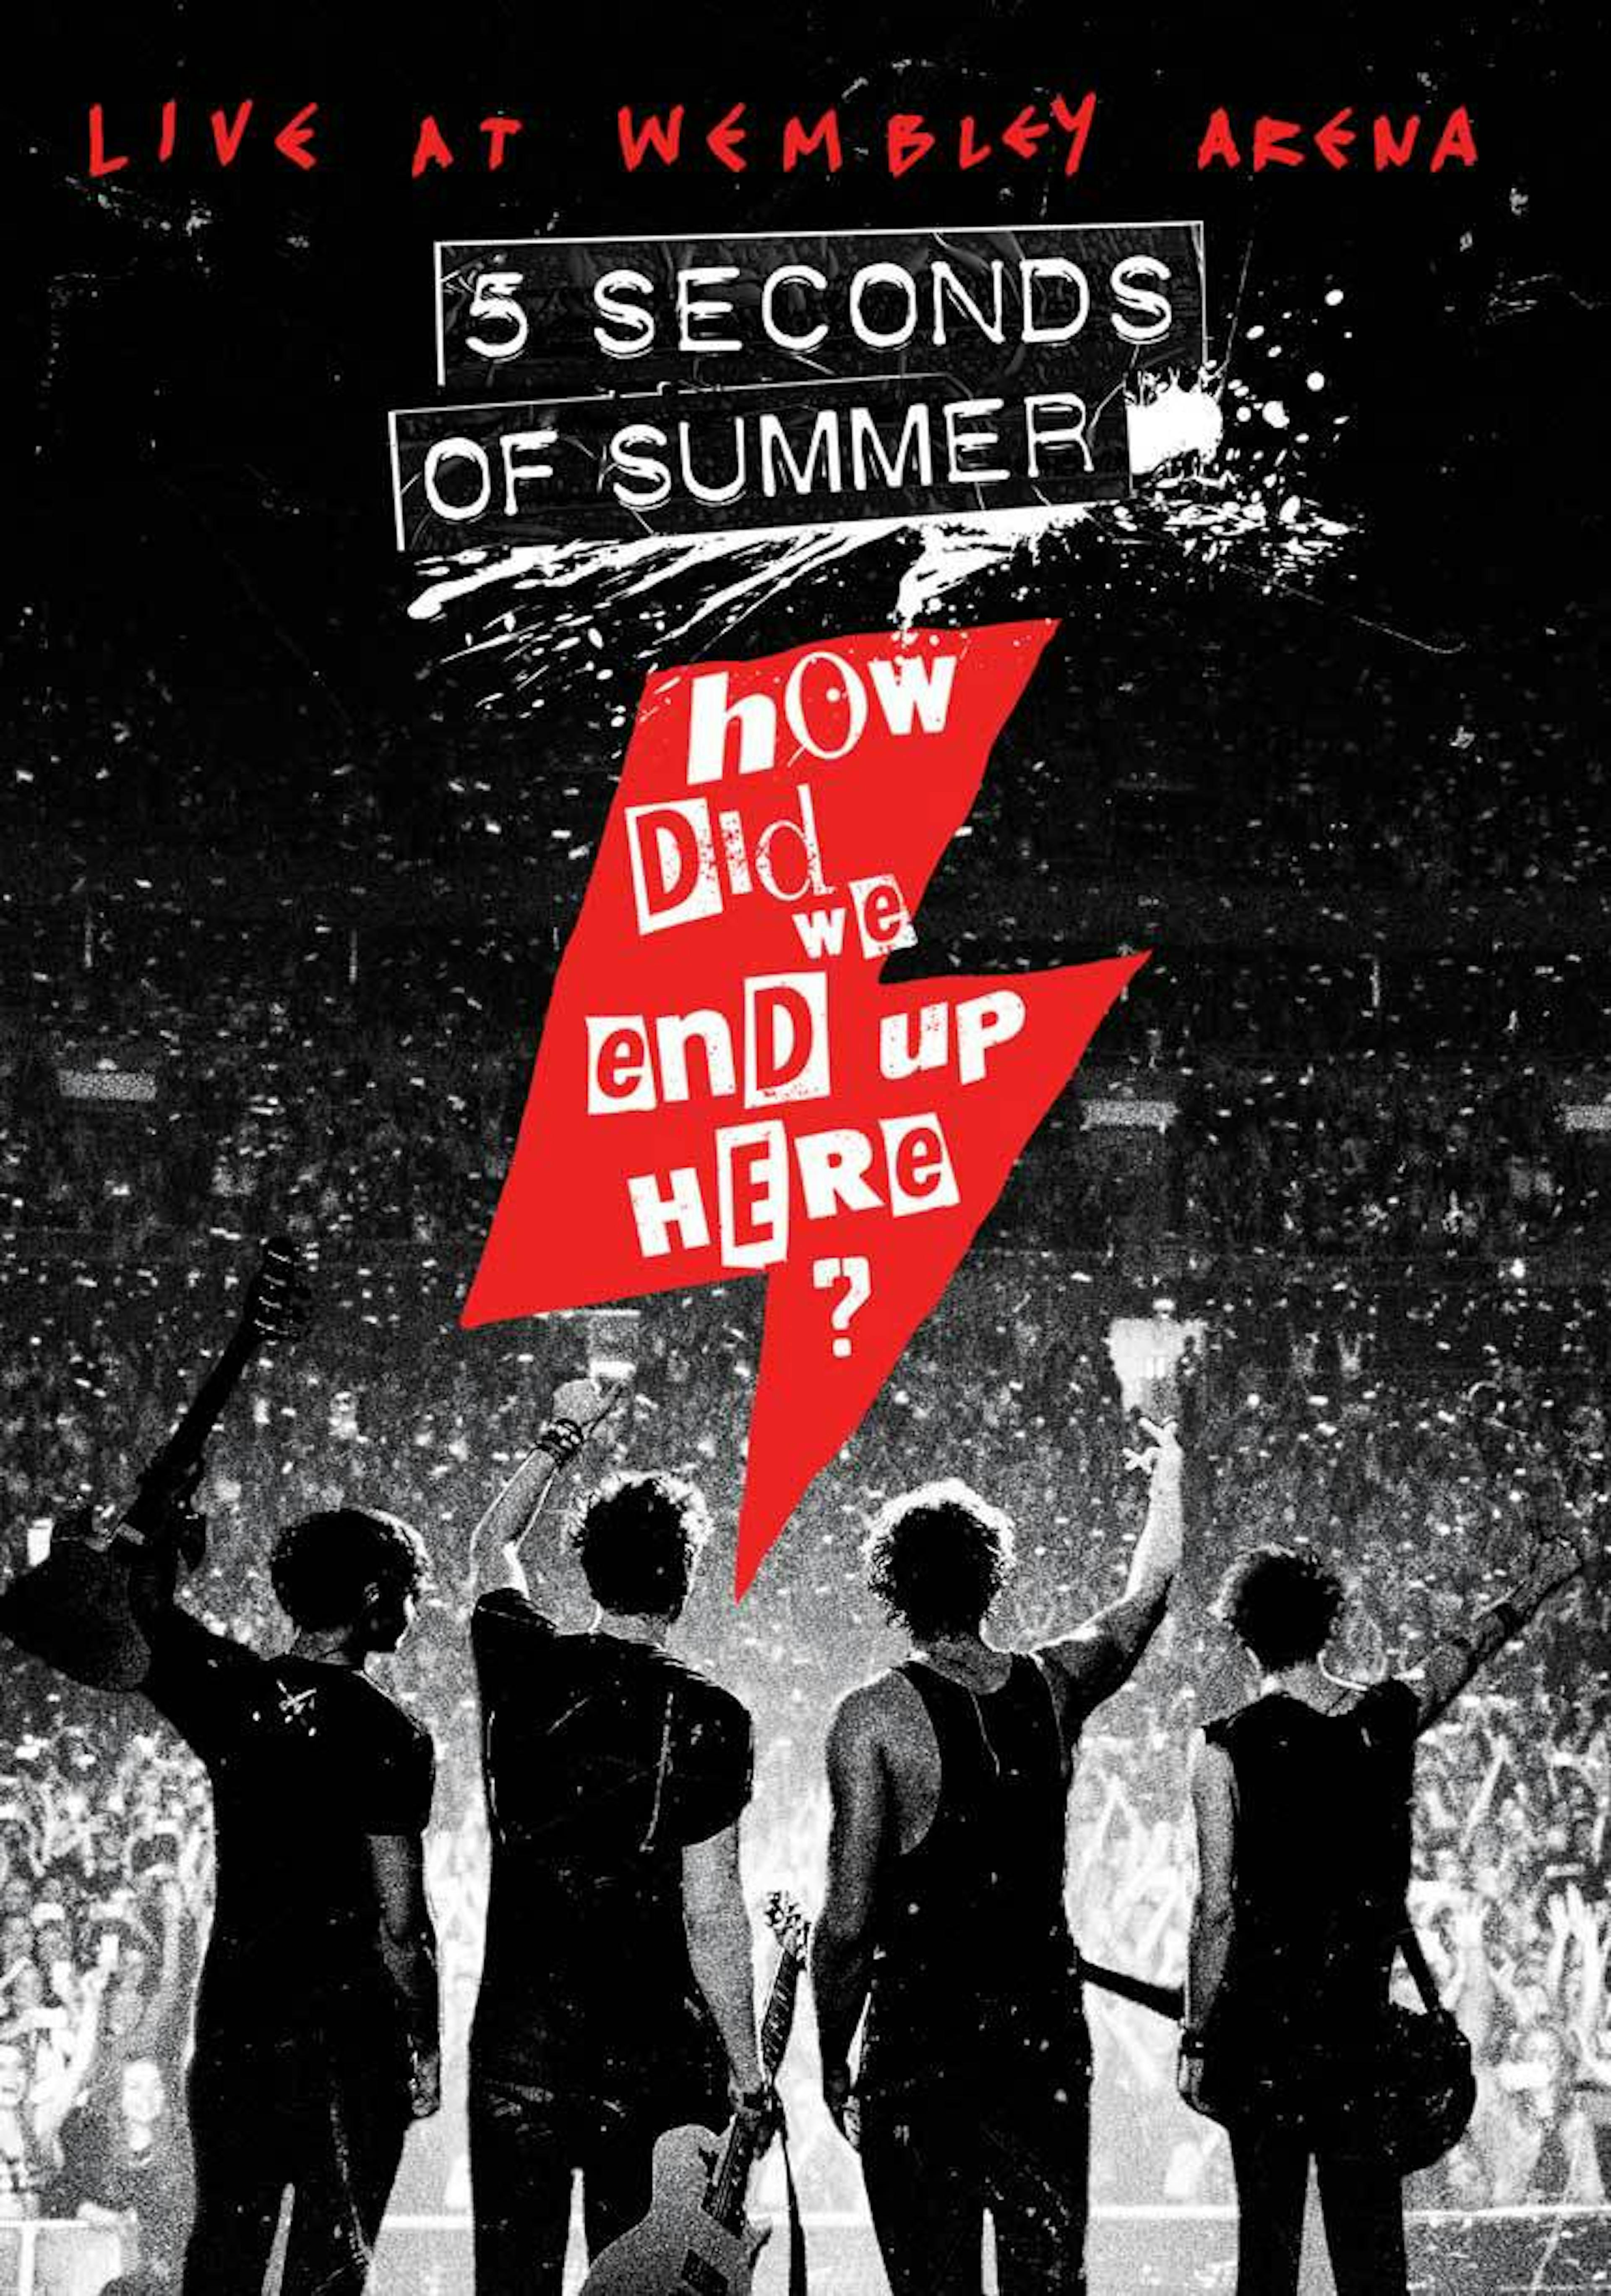 5 Seconds of Summer Announce DVD, How Did We End Up Here?